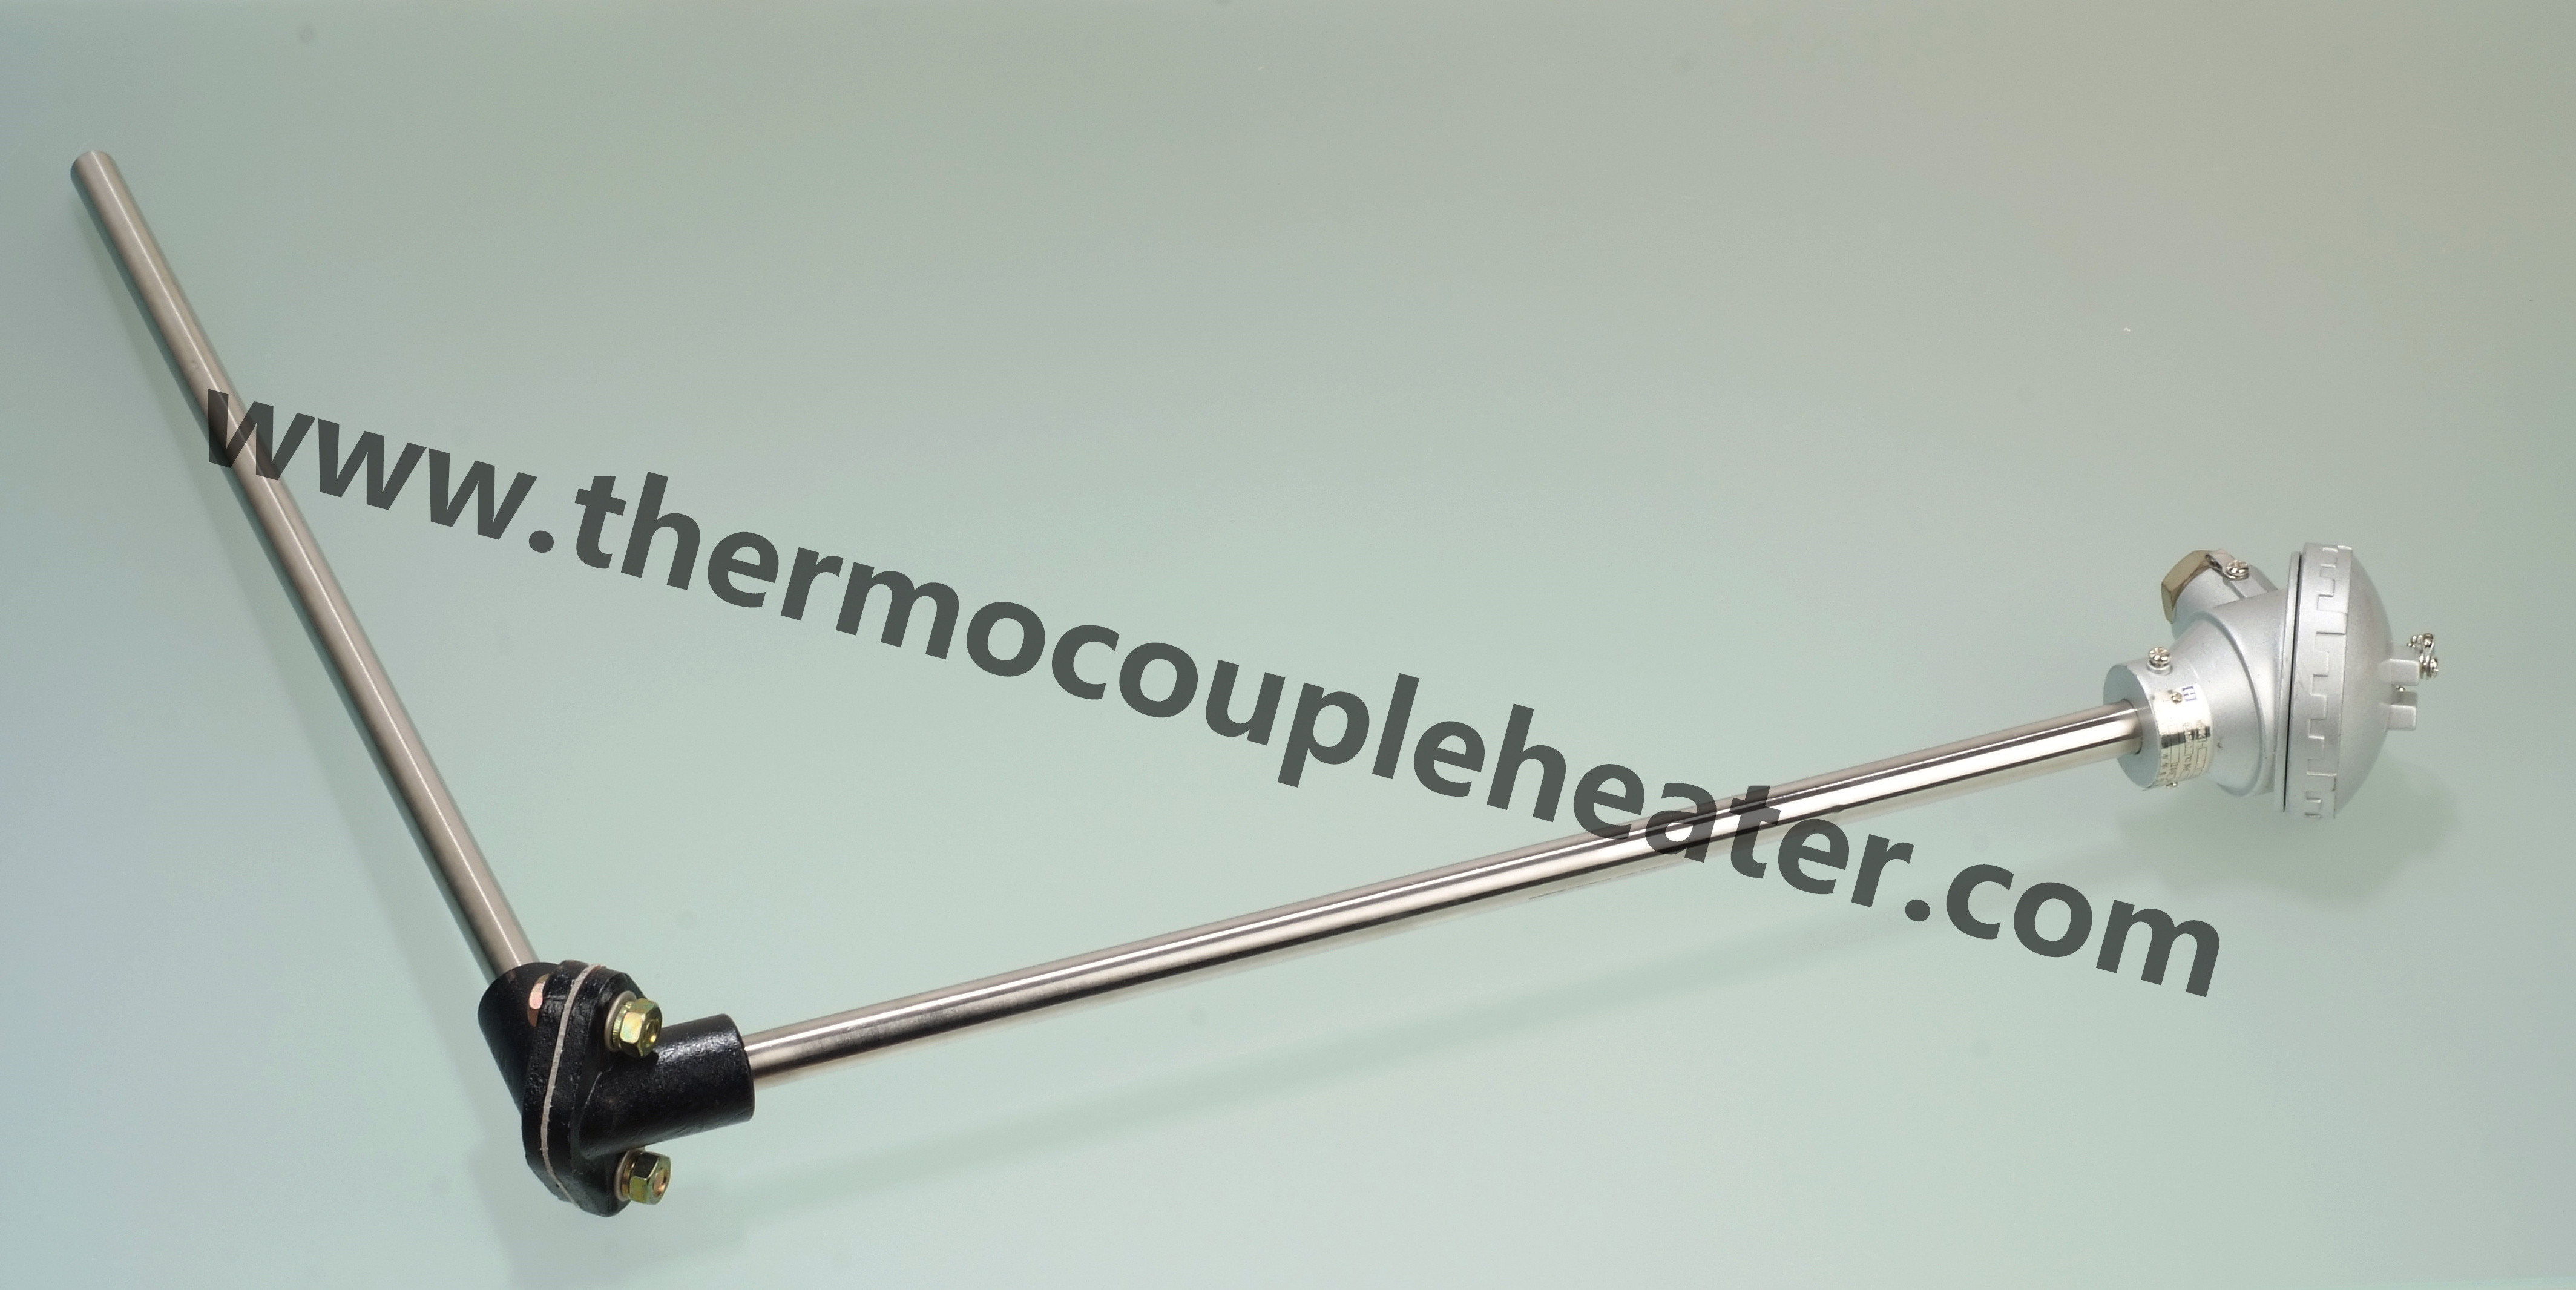 Temperature Sensor Thermocouple RTD L-Shape With Reinforced Protection